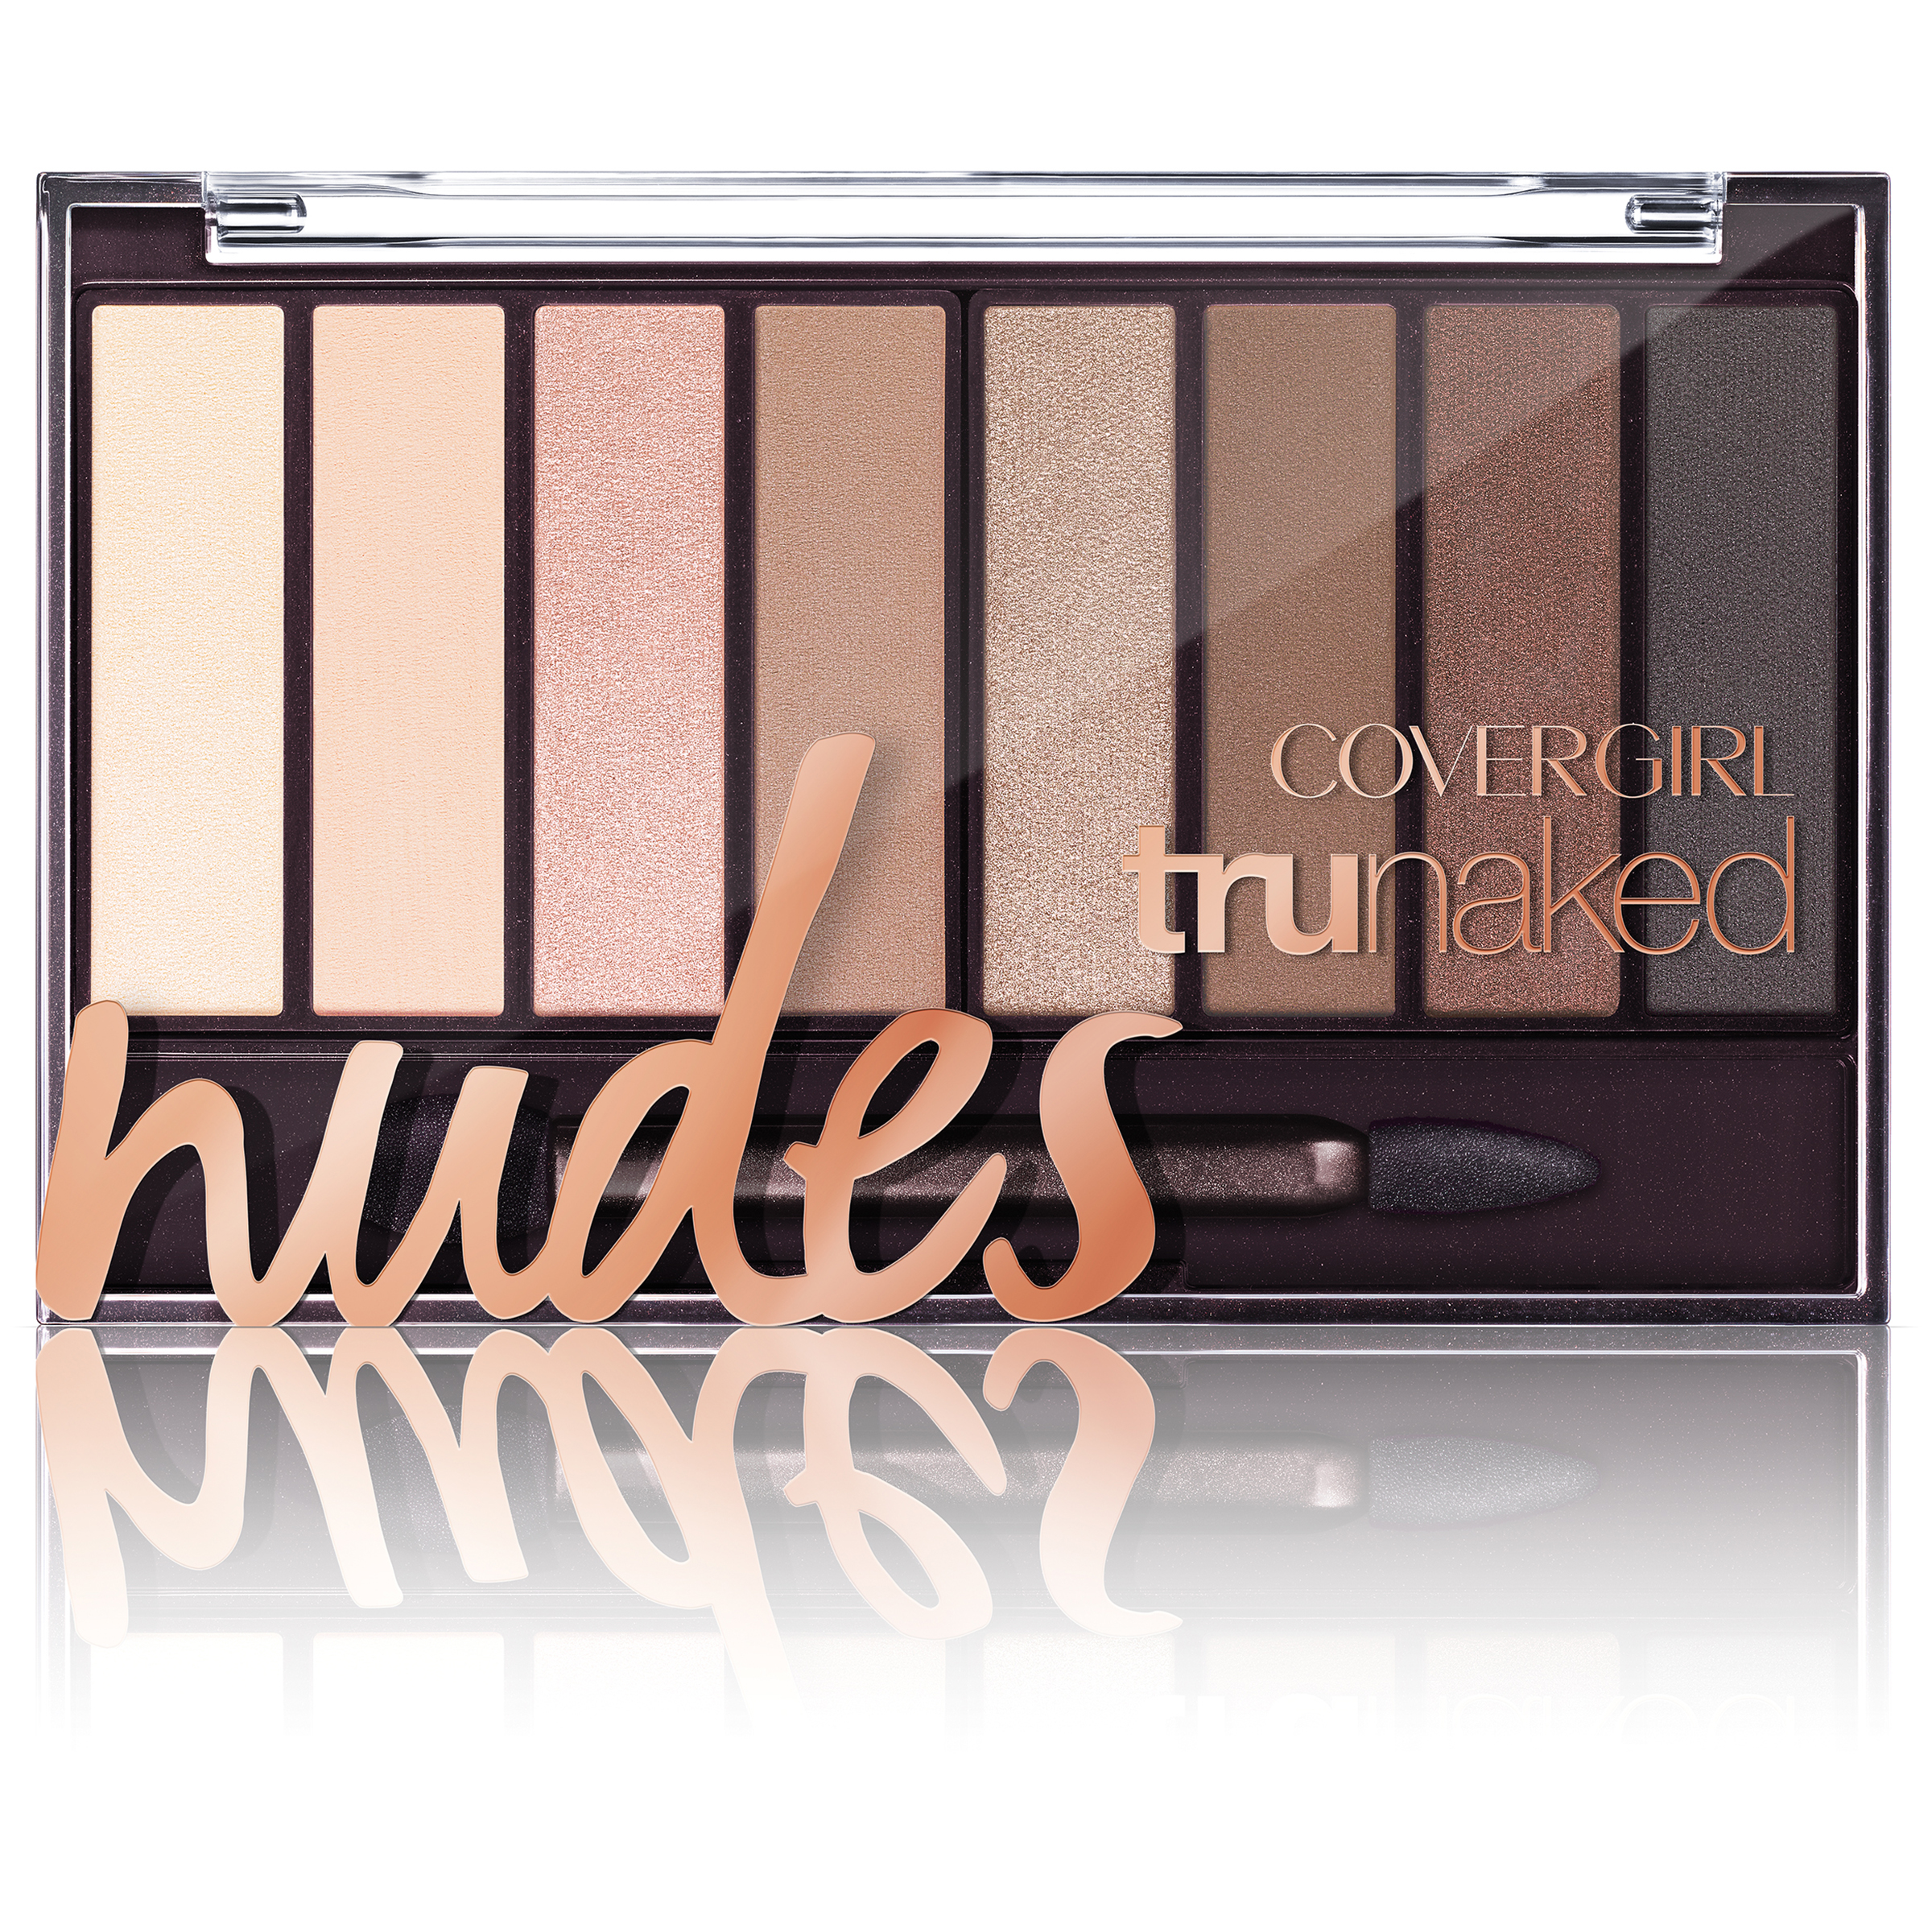 CoverGirl truNaked Eye Shadow Palettes, 1 Each